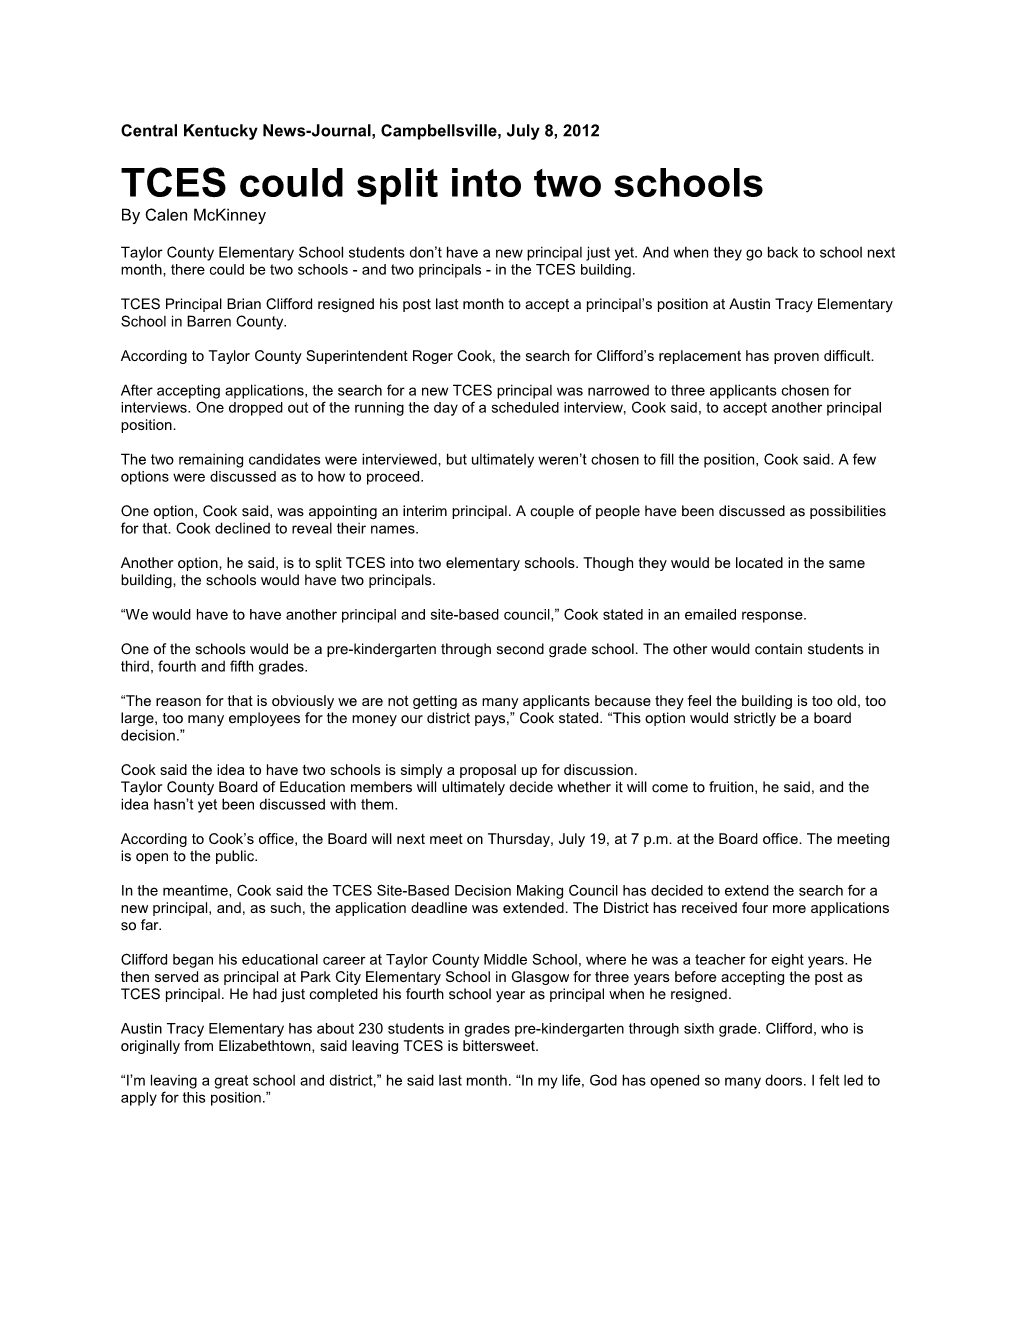 TCES Could Split Into Two Schools